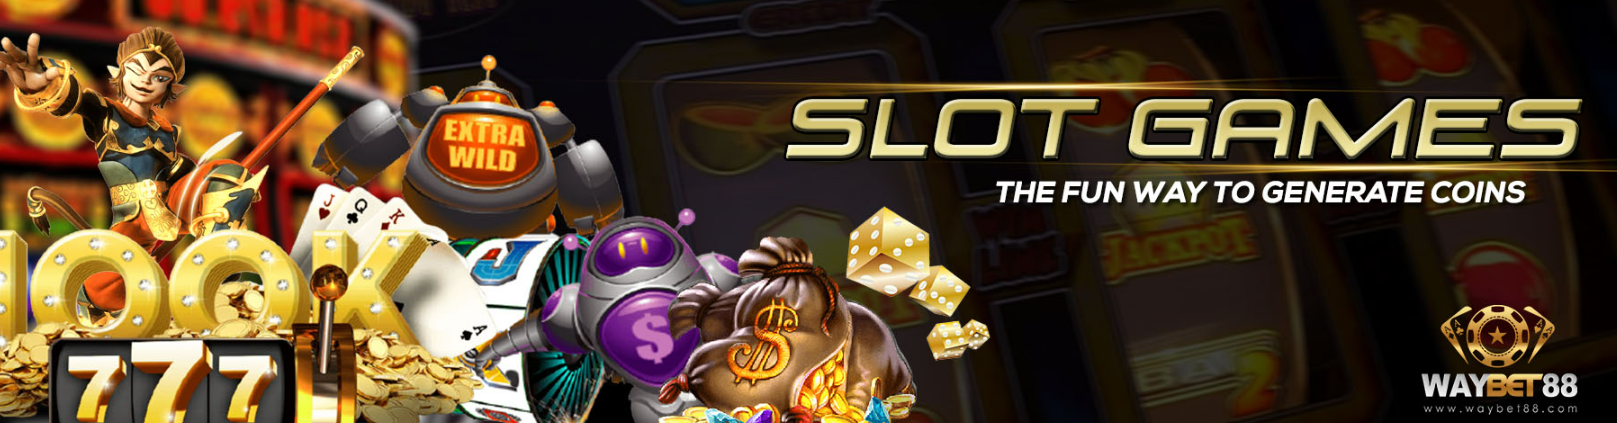 7 Best Online Slots for High Payouts and Real Money Wins